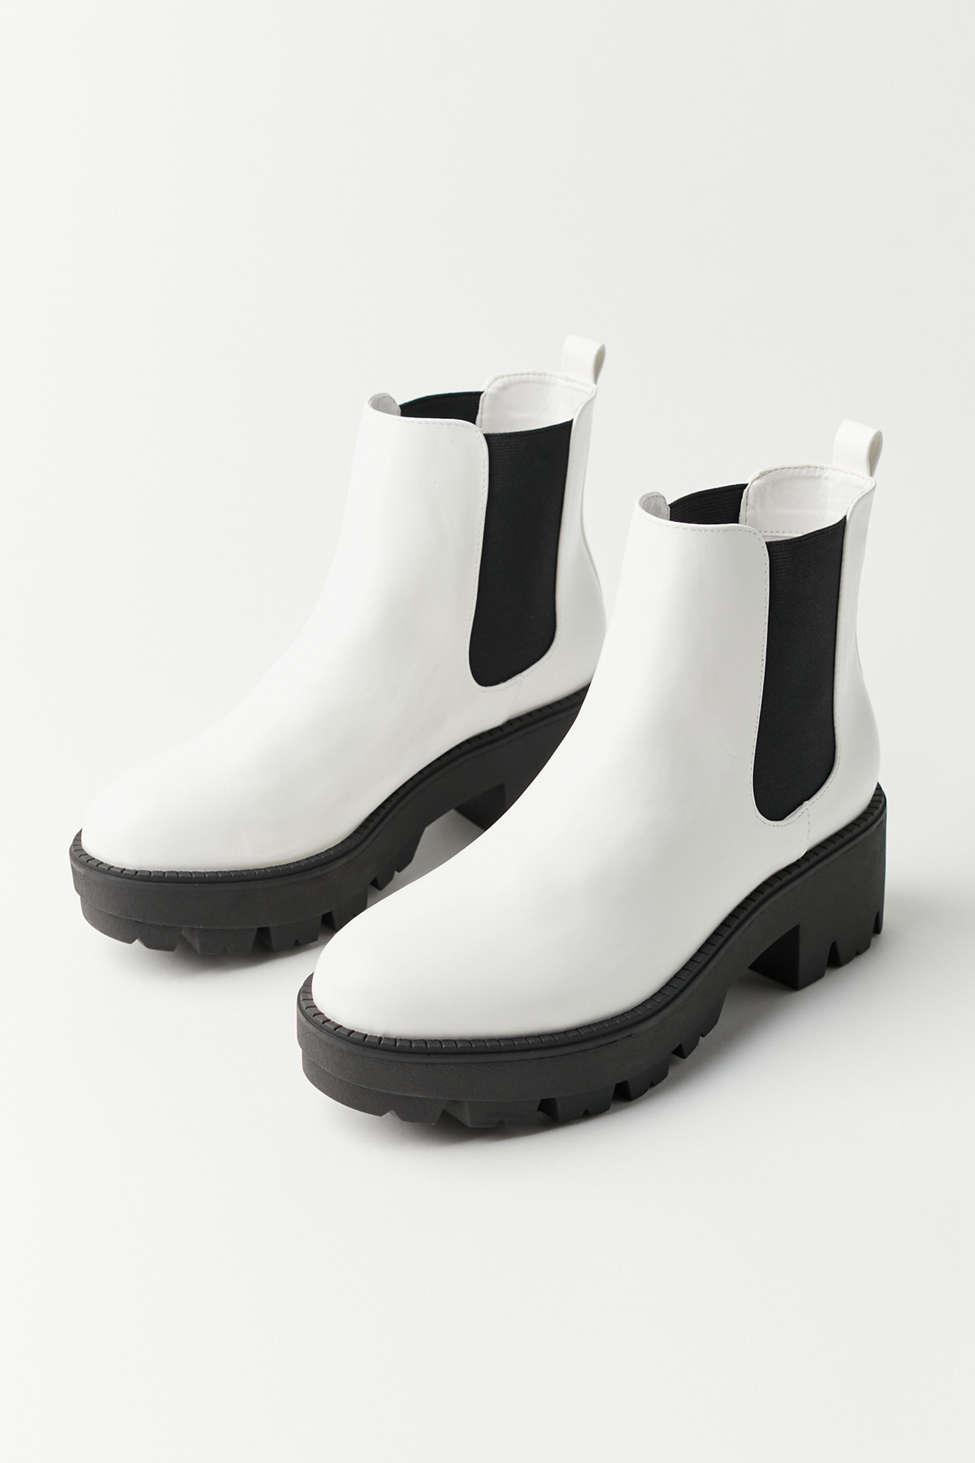 Urban Outfitters Uo Remy Chelsea Boot in White - Lyst